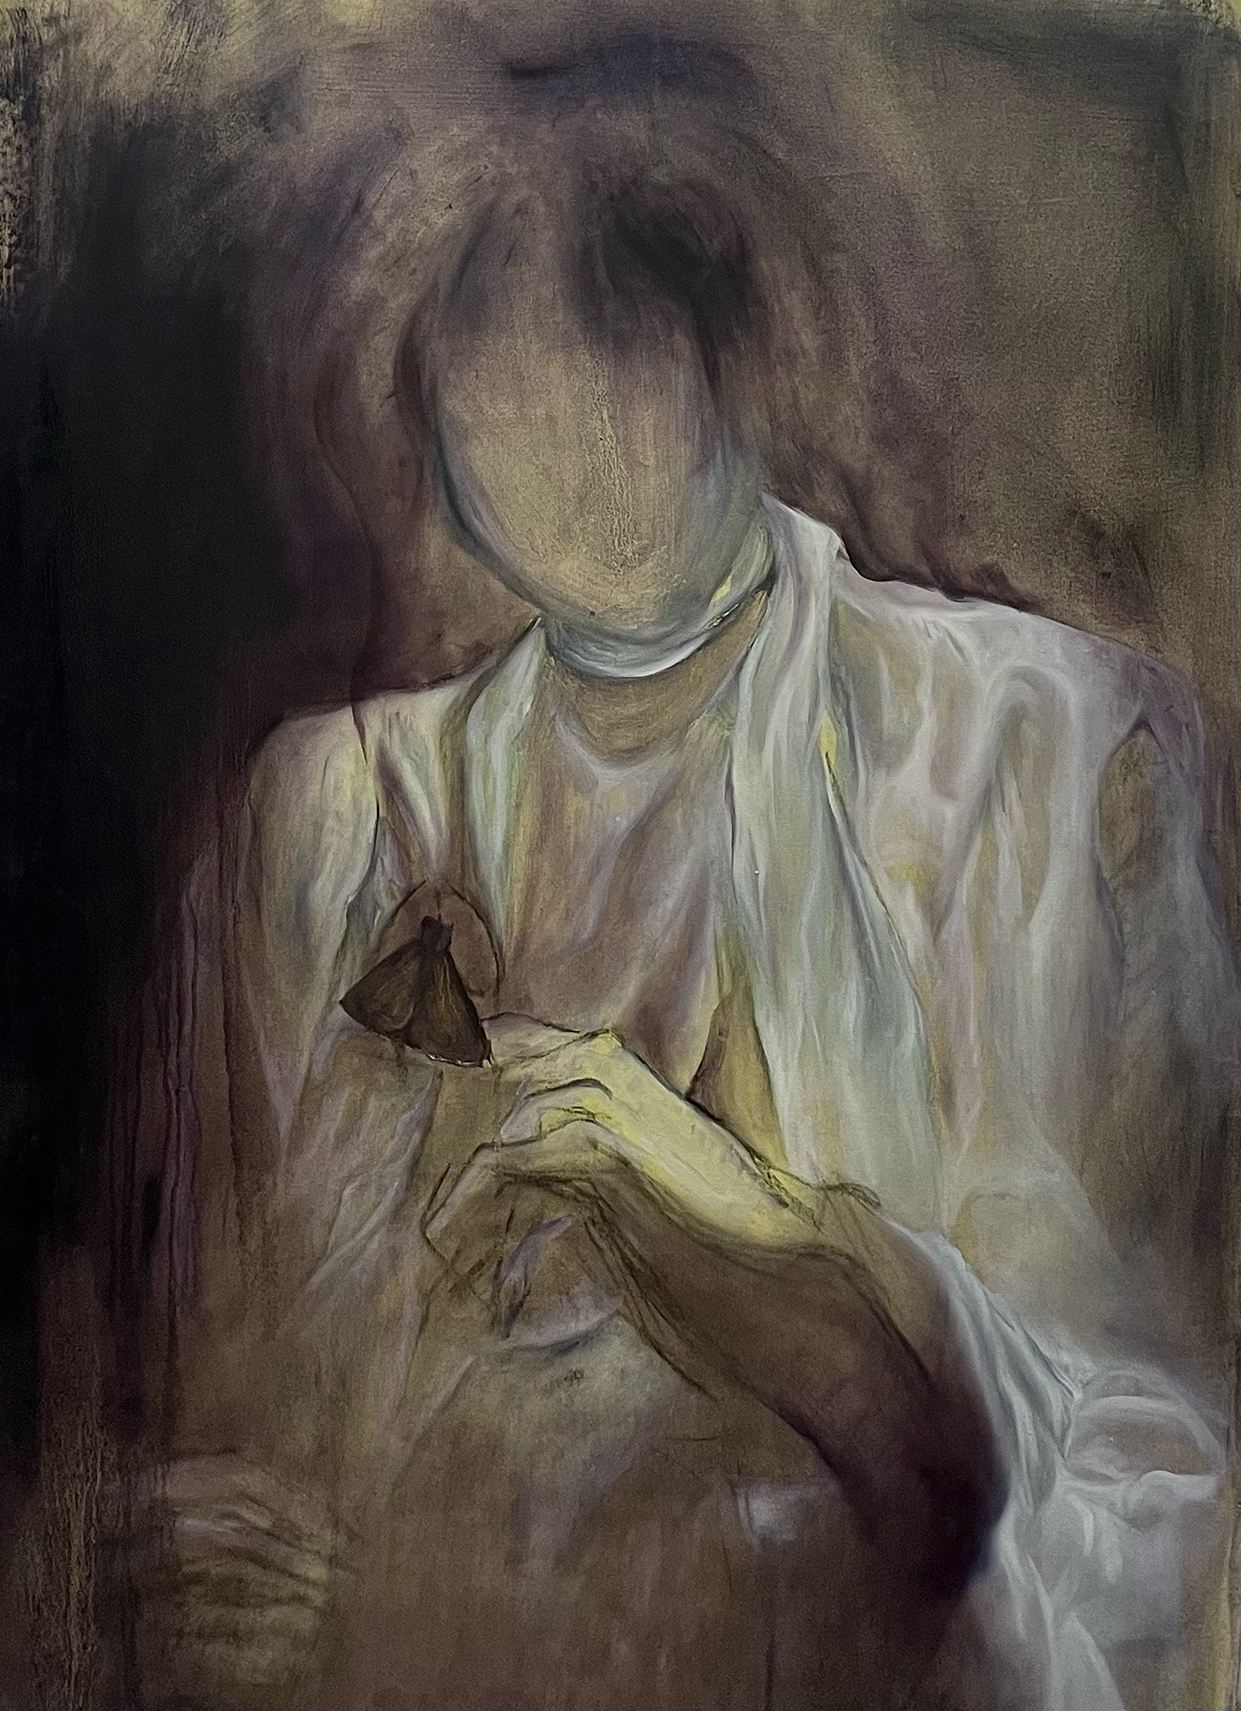 A dark painting of a faceless person dressed in white and touching a moth.